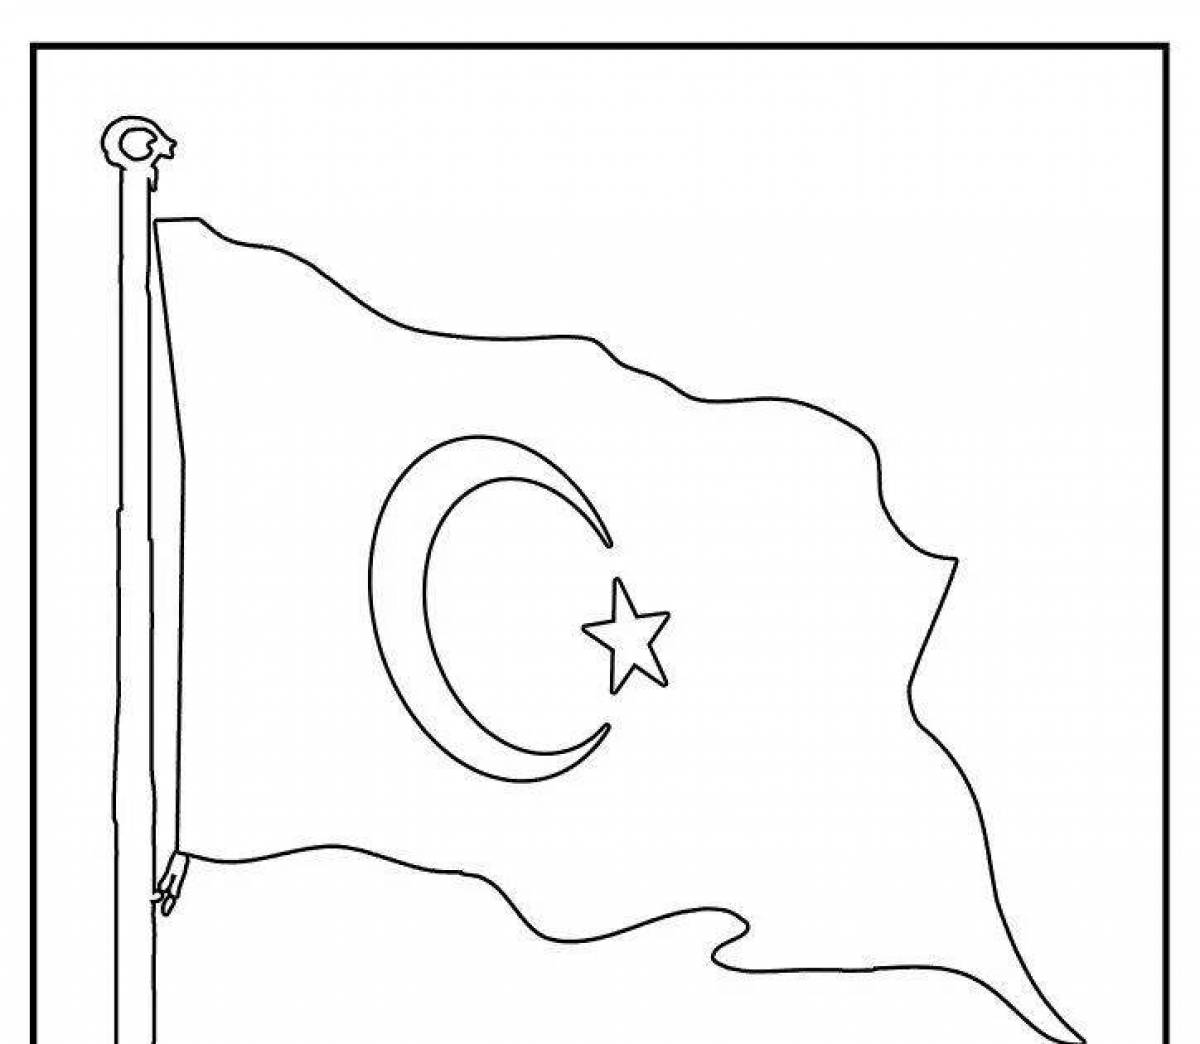 Turkey flag humor coloring page